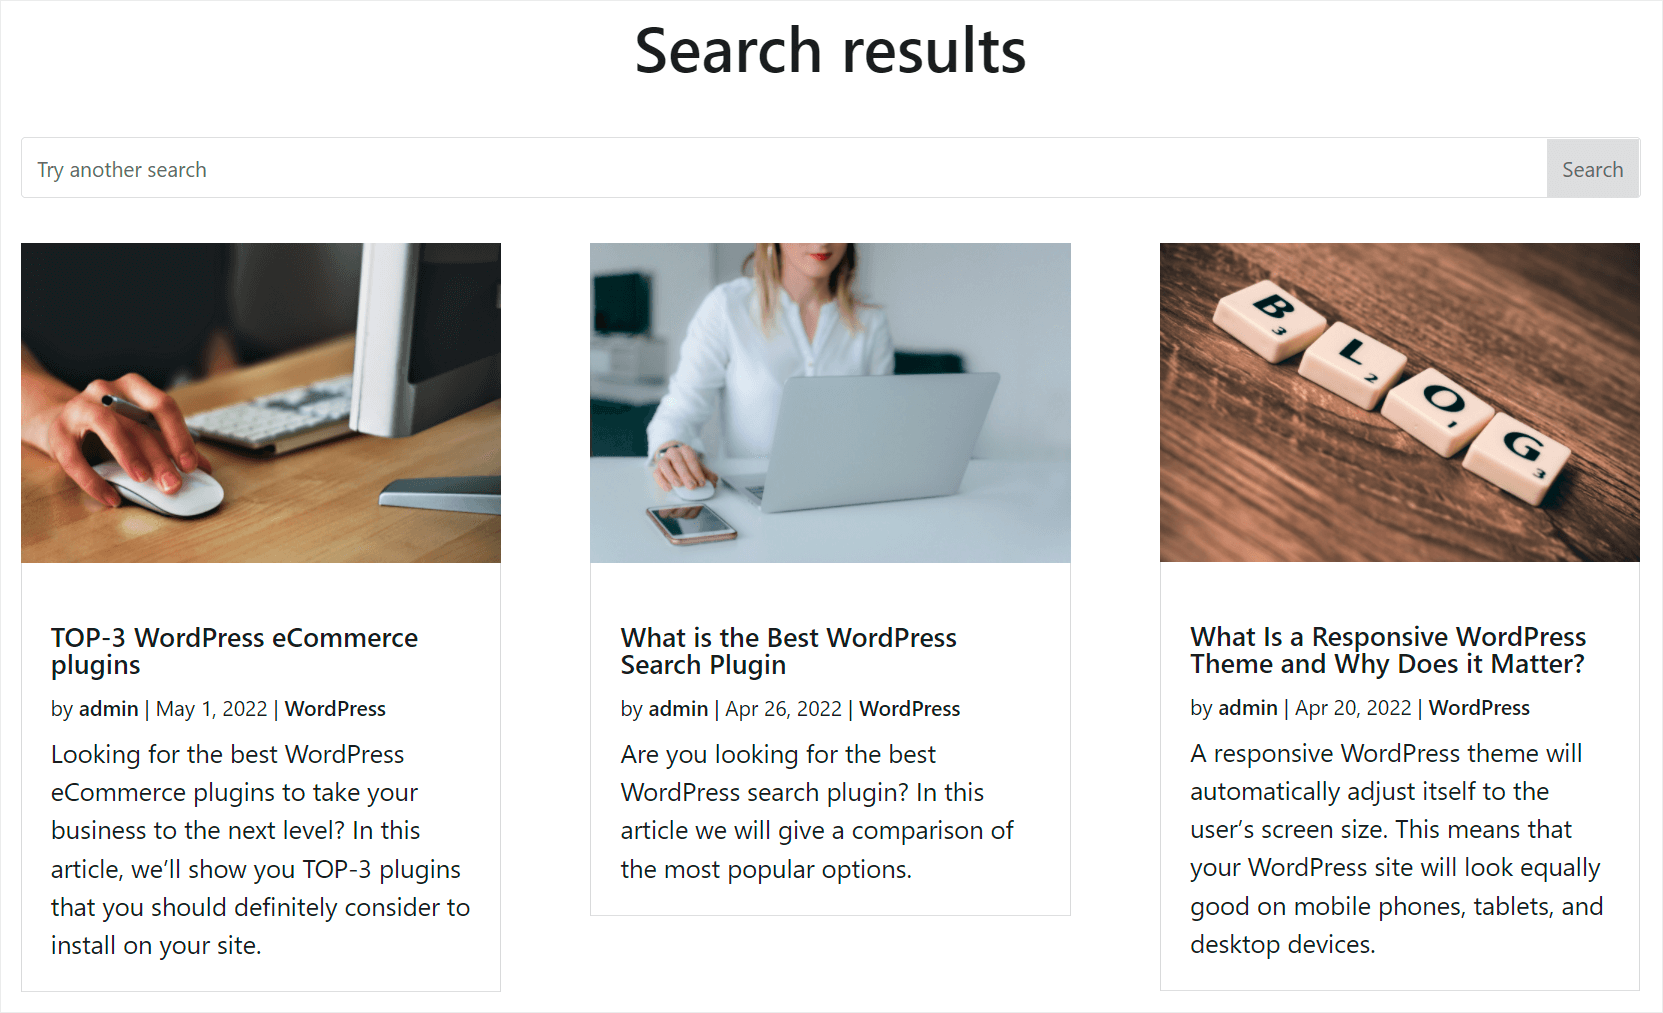 that's how our search page looks